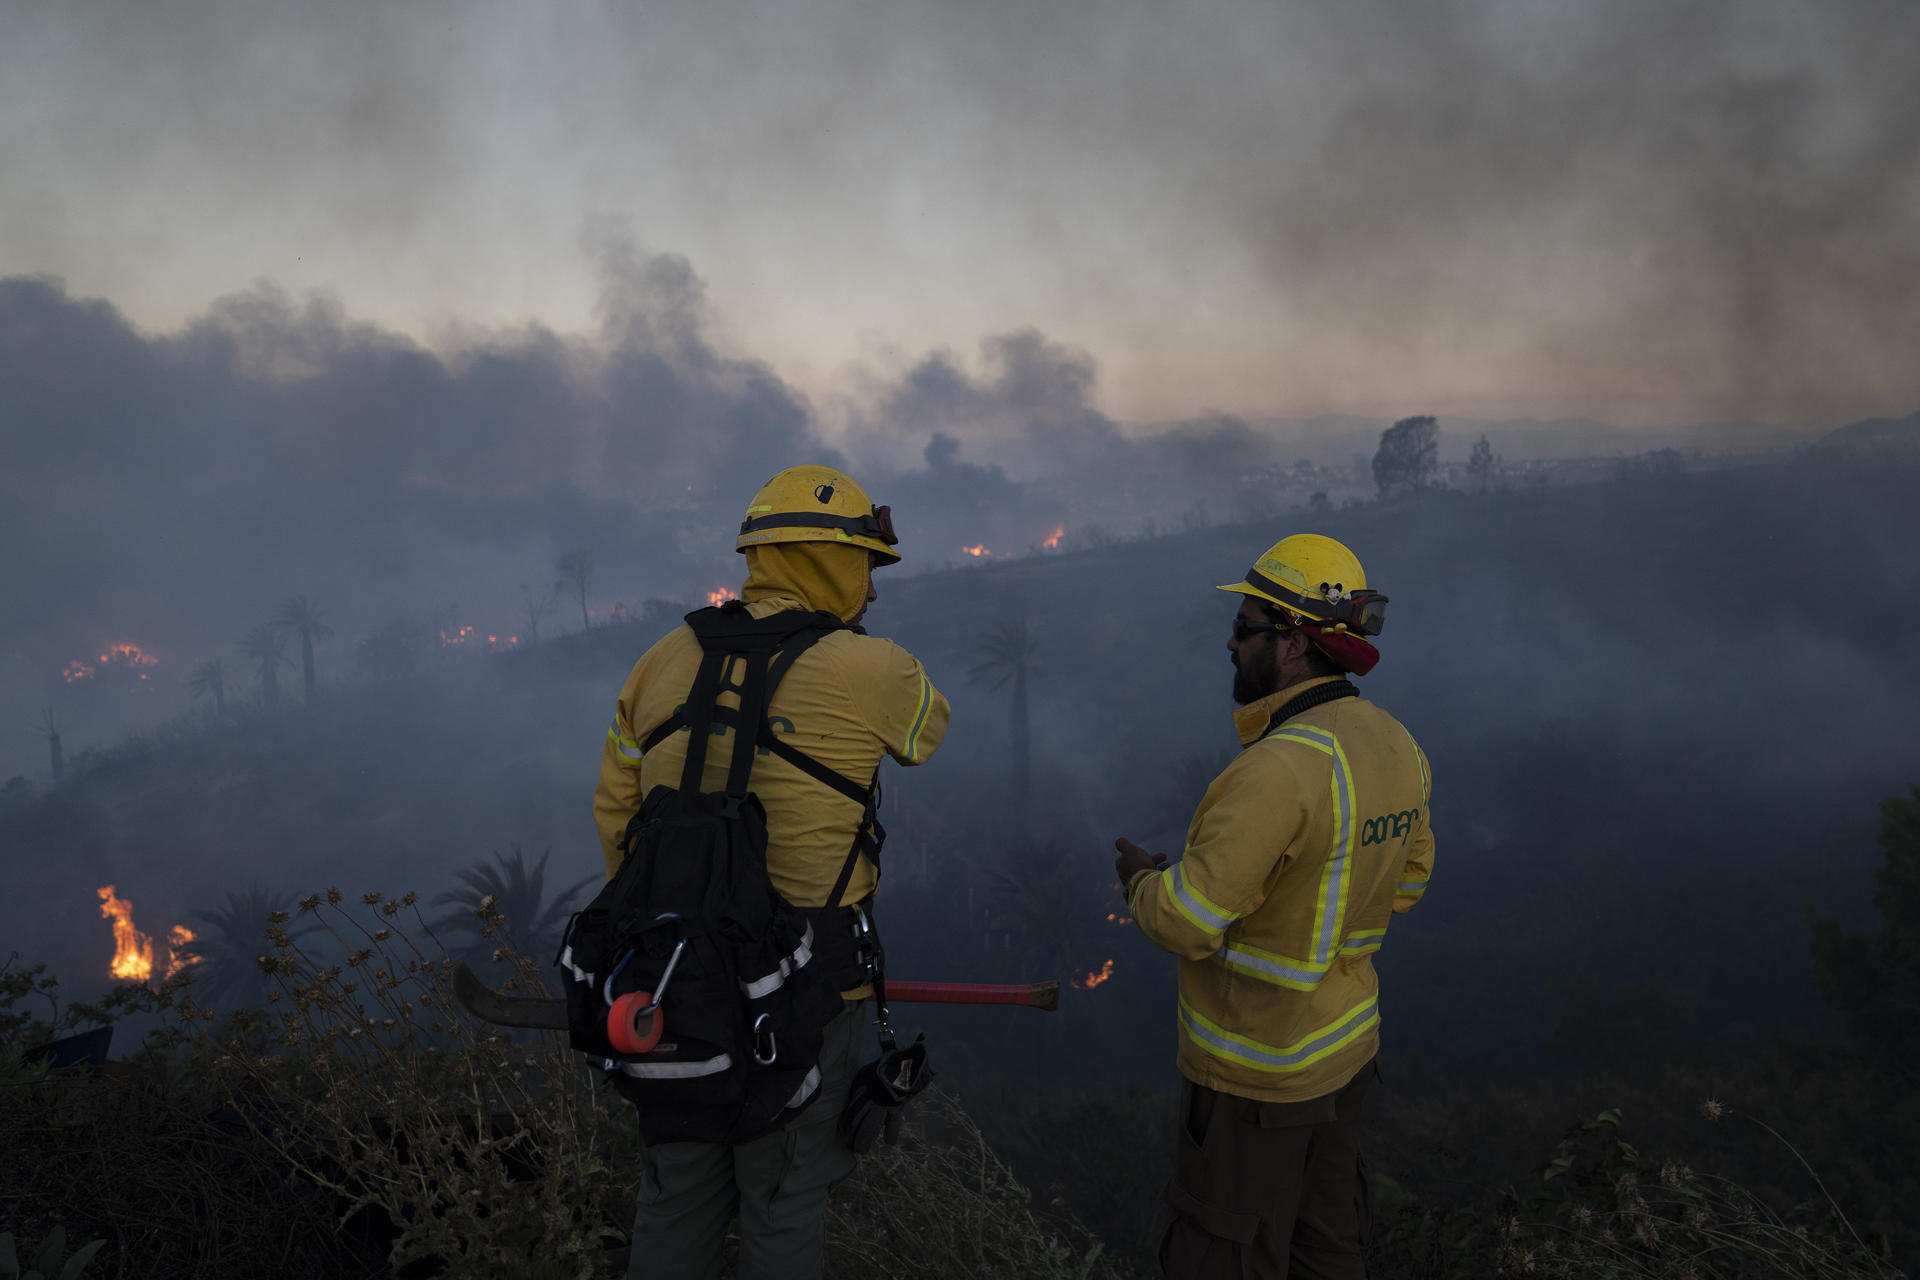 Firefighters work to put out the fire (EFE/Adriana Thomas)